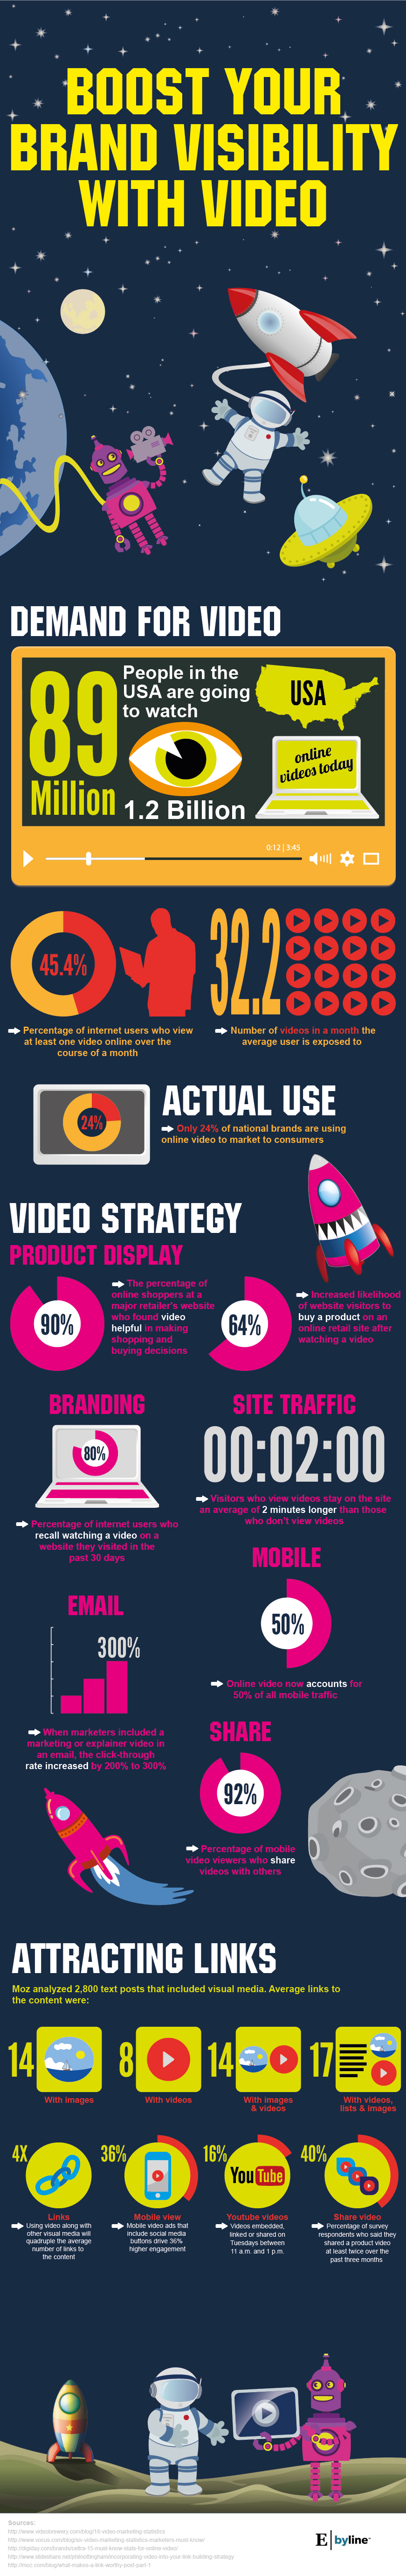 Boost Your Brand Visibility with Video